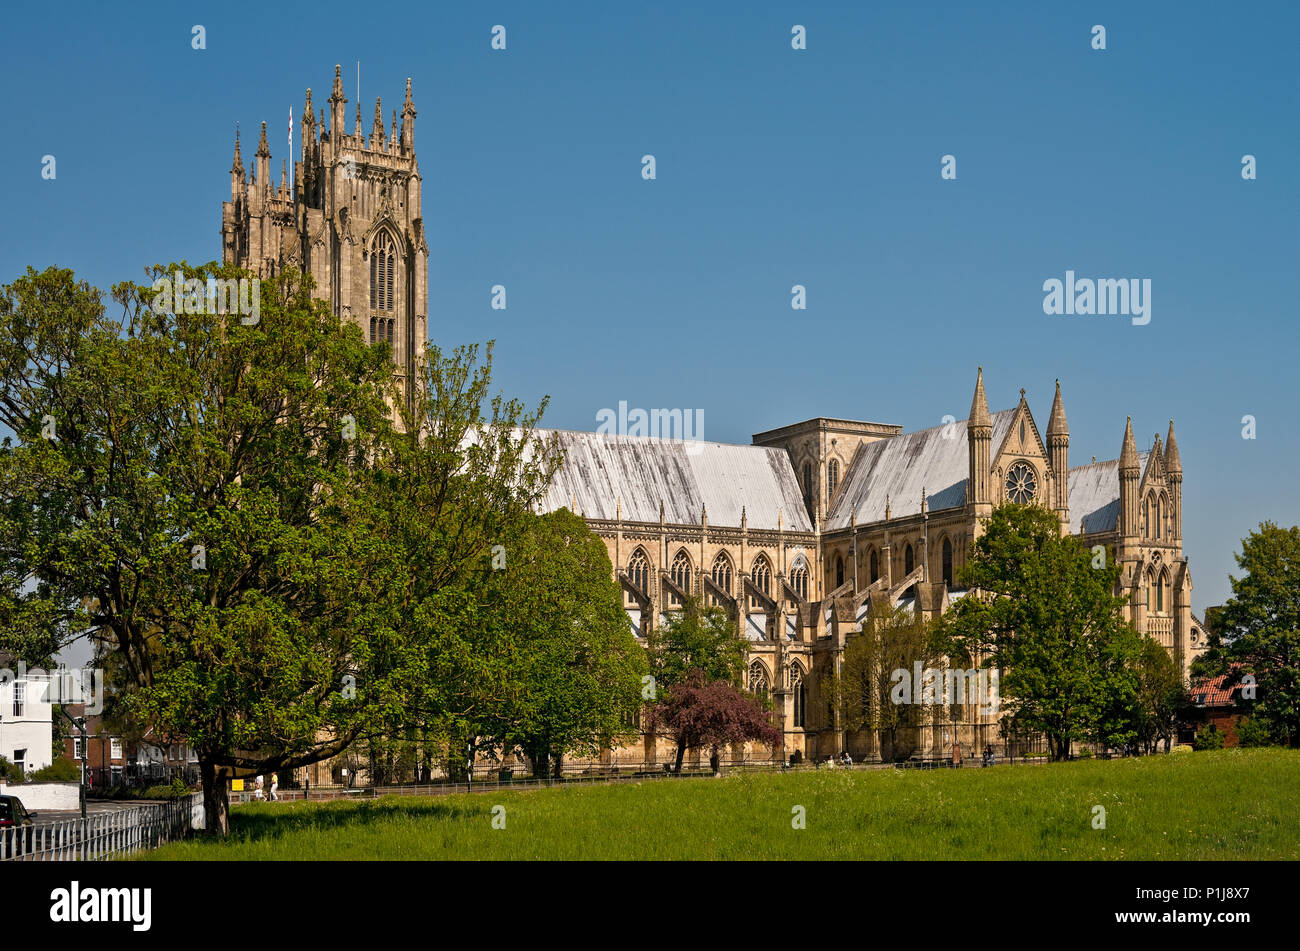 Beverley Minster exterior the Parish Church of St. John and St Martin in spring Beverley East Yorkshire England UK United Kingdom GB Great Britain Stock Photo